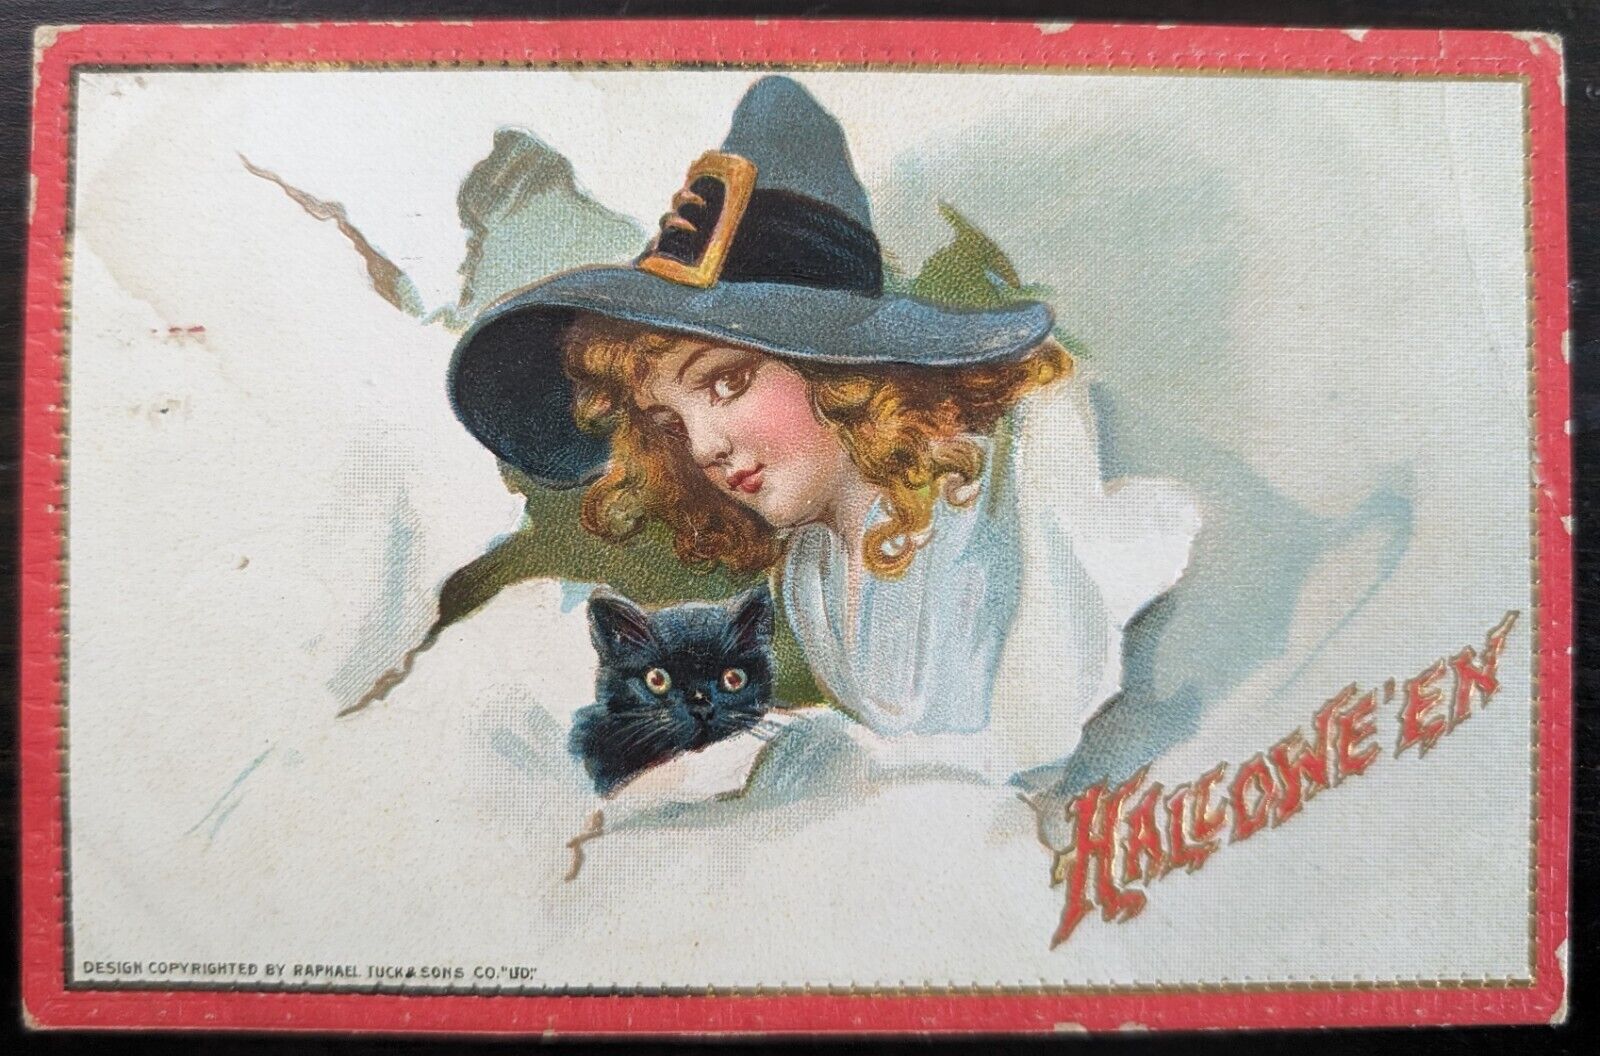 Halloween Pretty Witch with Black Cat Tuck Series 174 by Brundage Postcard